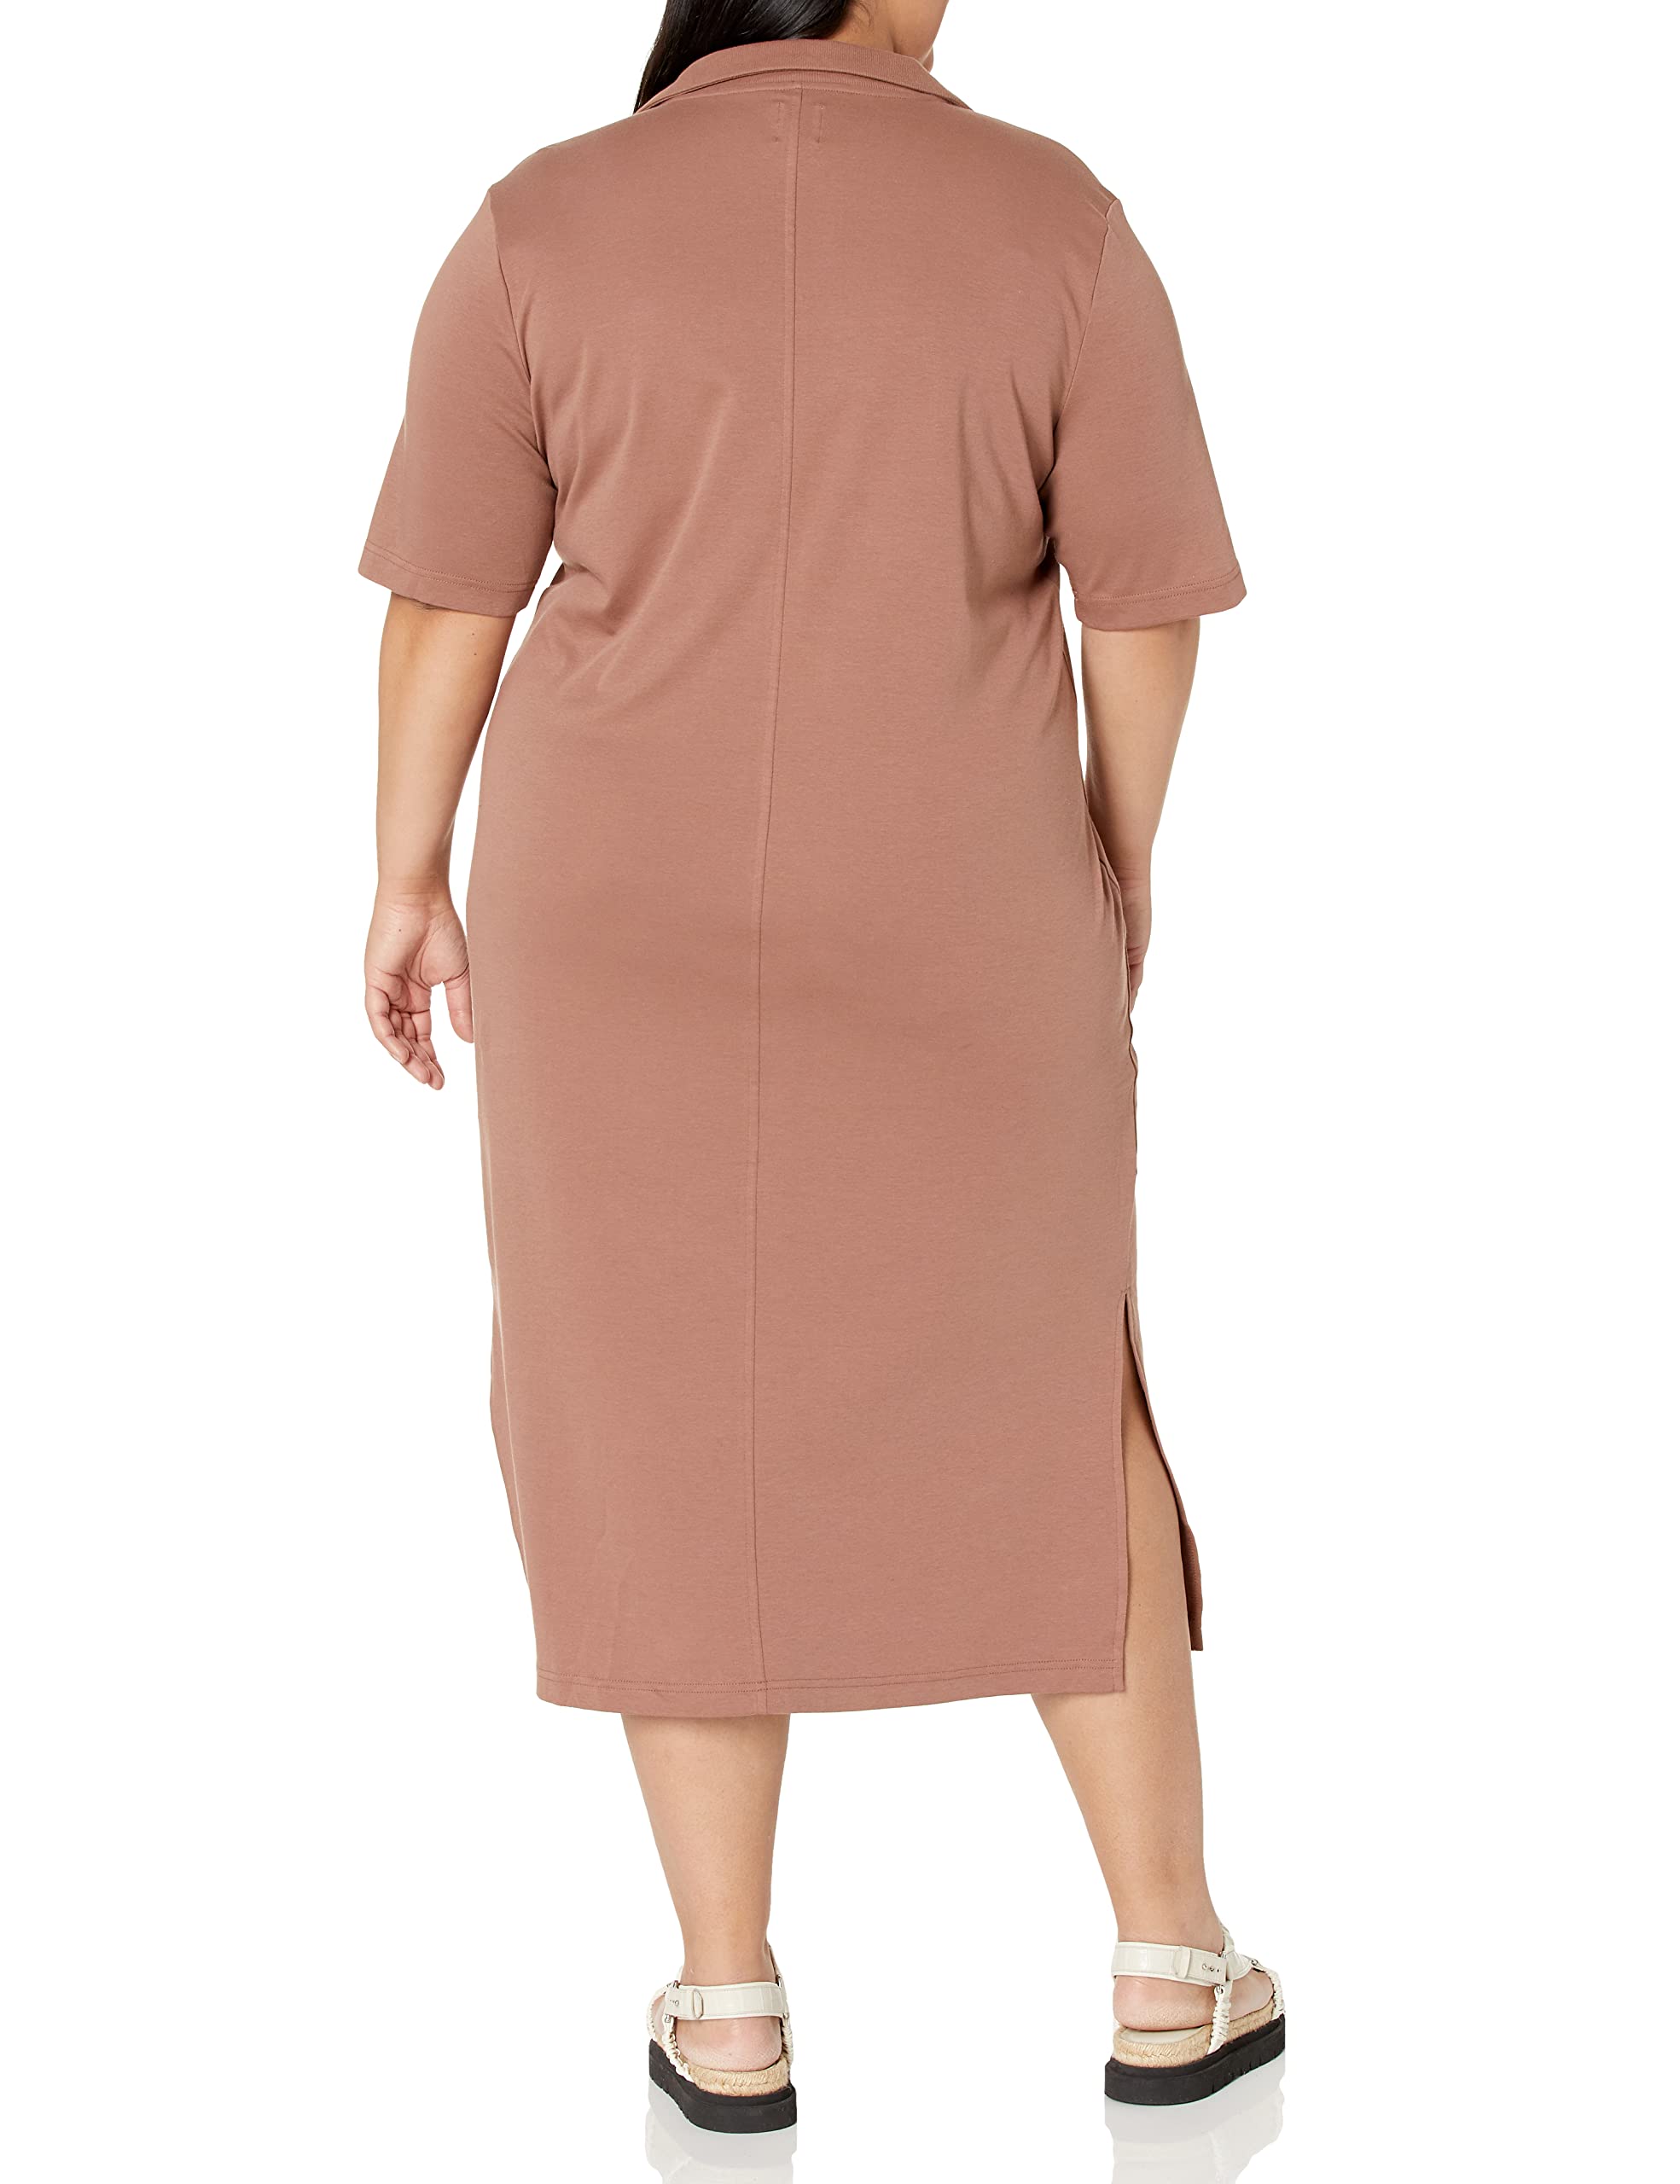 Amazon Essentials Womens Organic Cotton Jersey Short-Sleeve Midi Polo Dress (Available in Plus Size)